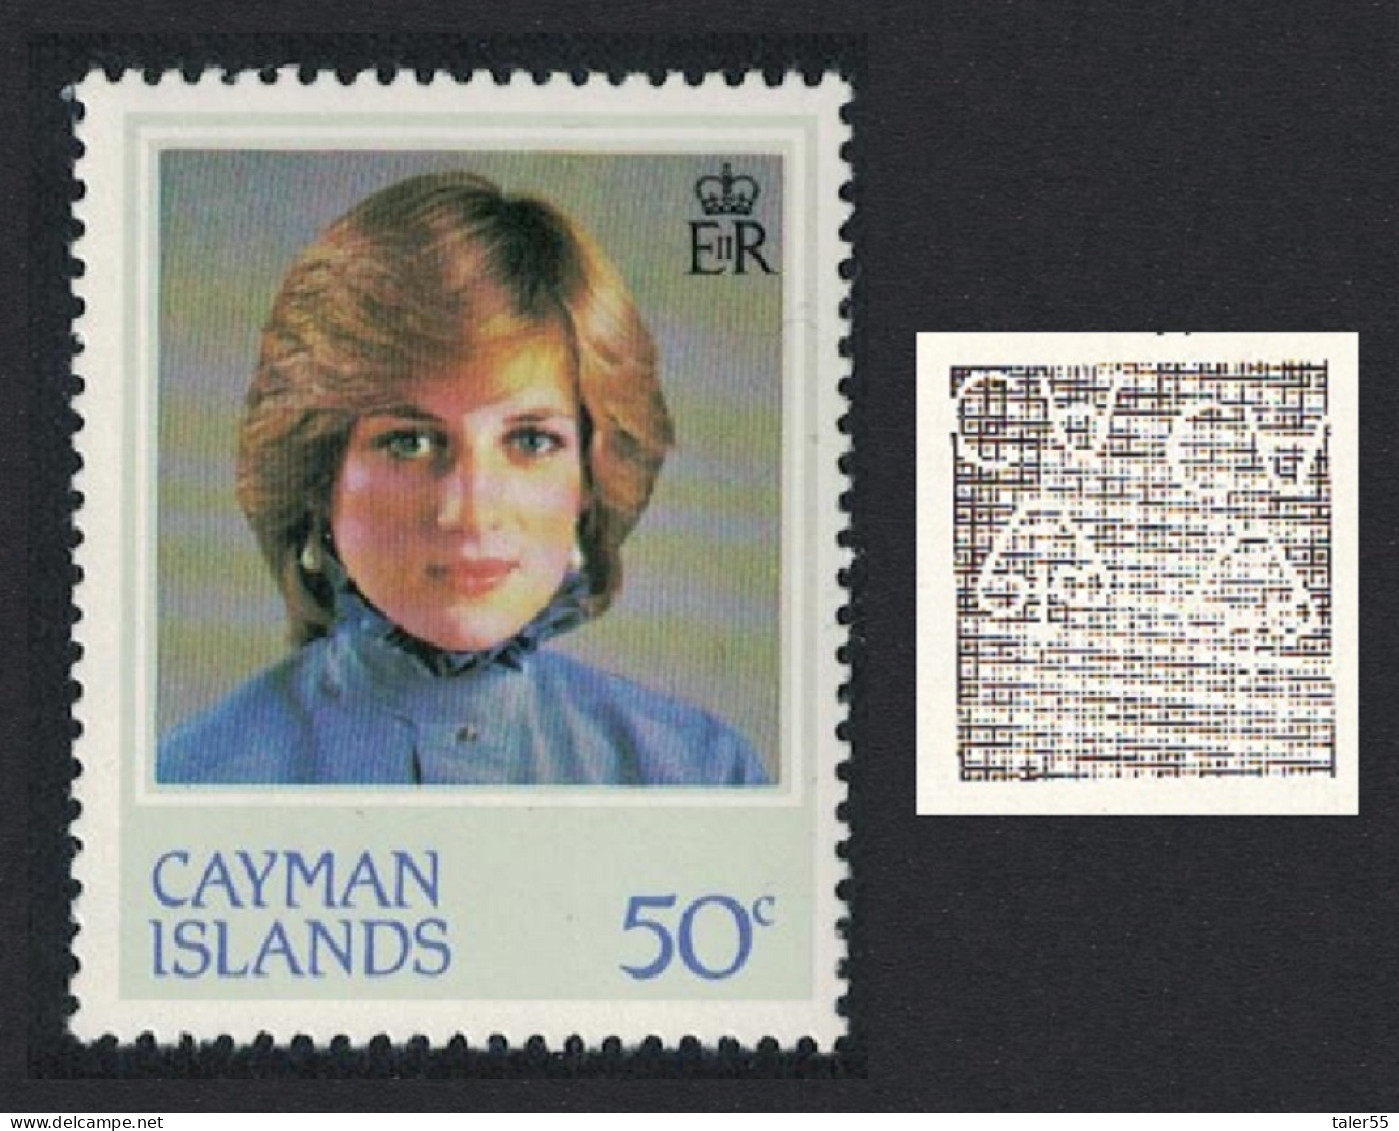 Cayman Is. 21st Birthday Of Princess Of Wales 50c Watermark Variety 1982 MNH SG#552w - Cayman Islands